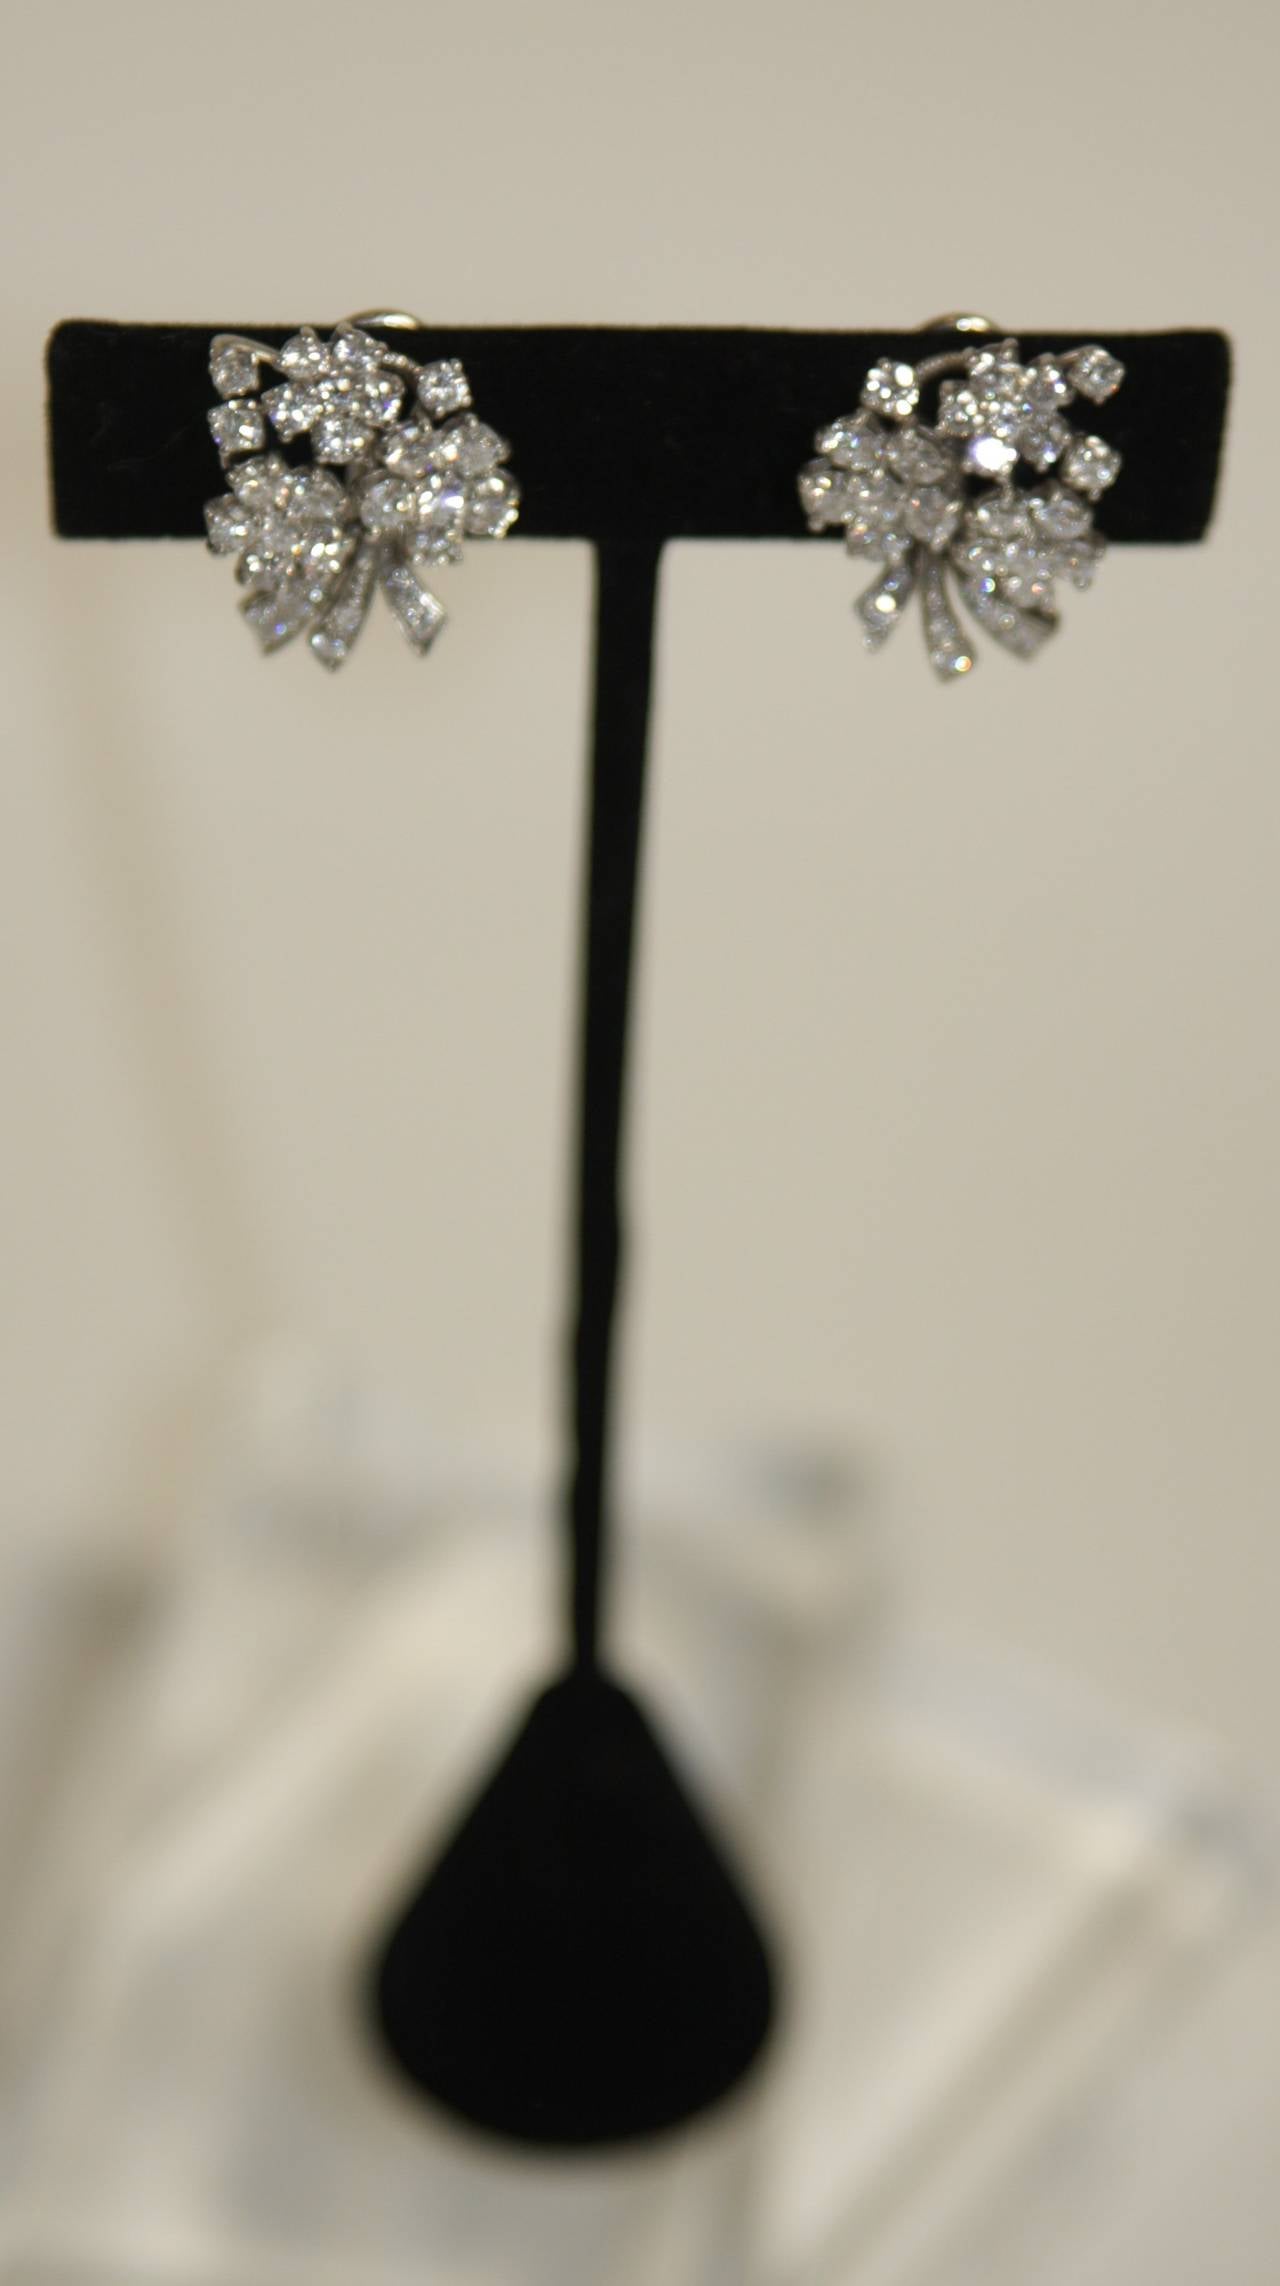 These are a pair of diamond and platinum floral motif earrings. They feature a clasp closure. They are a wonderful pair of earrings with amazing proportion.

Measures (Approximately)
Diamonds 3.60 carats
Length: 7/8